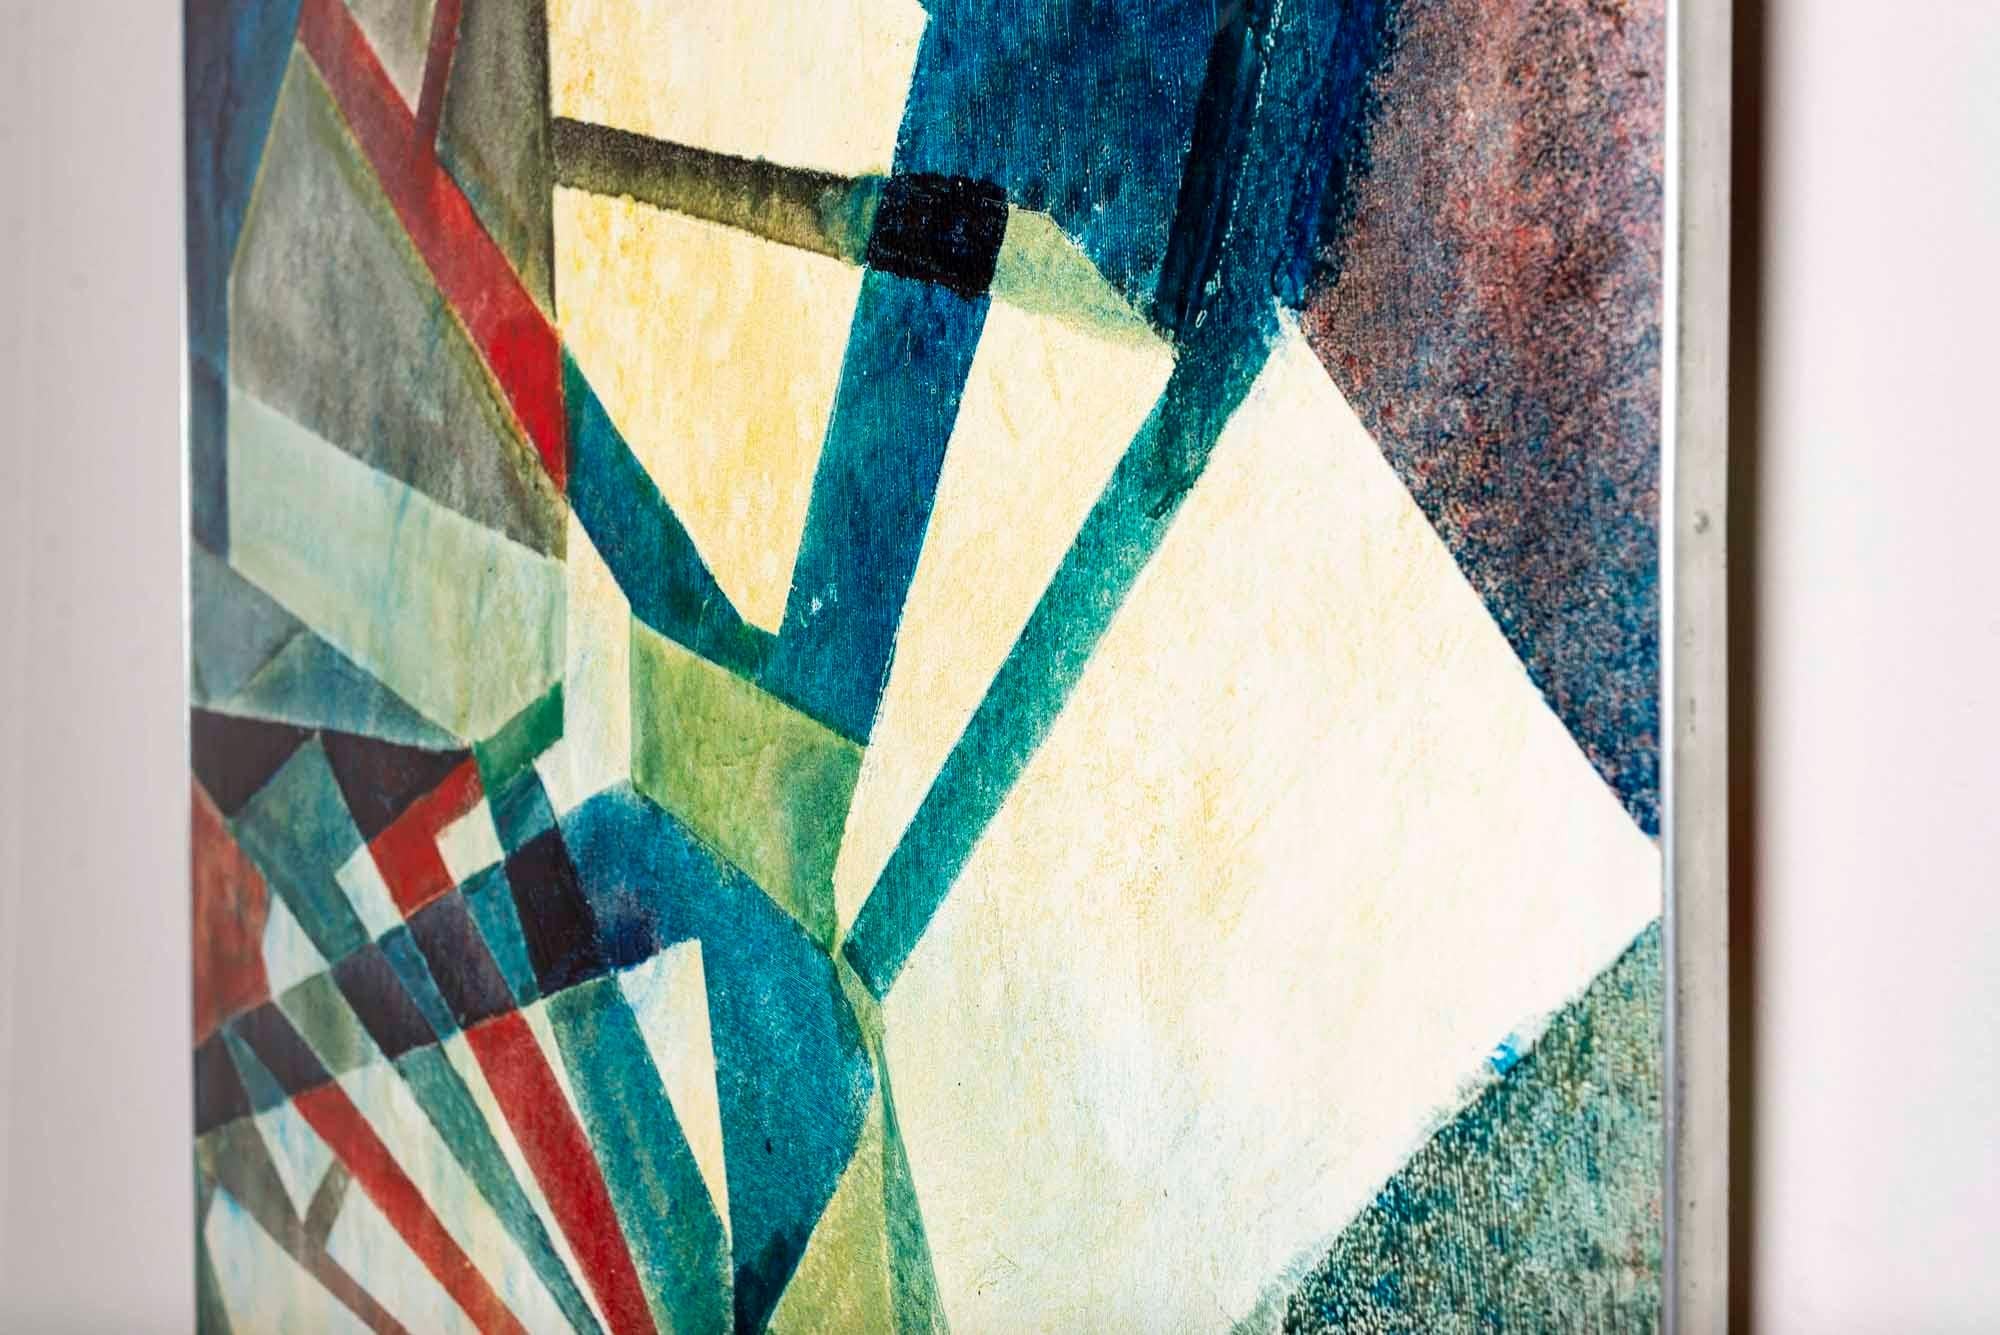 A modern Swedish abstract oil painting by Leo Reis (1926-2001) which was exhibited in the Skane Art Association show in 1944 where Reis was named the most promising artist
During the 1950s he joined the Concret Art Movement.
The movement had a